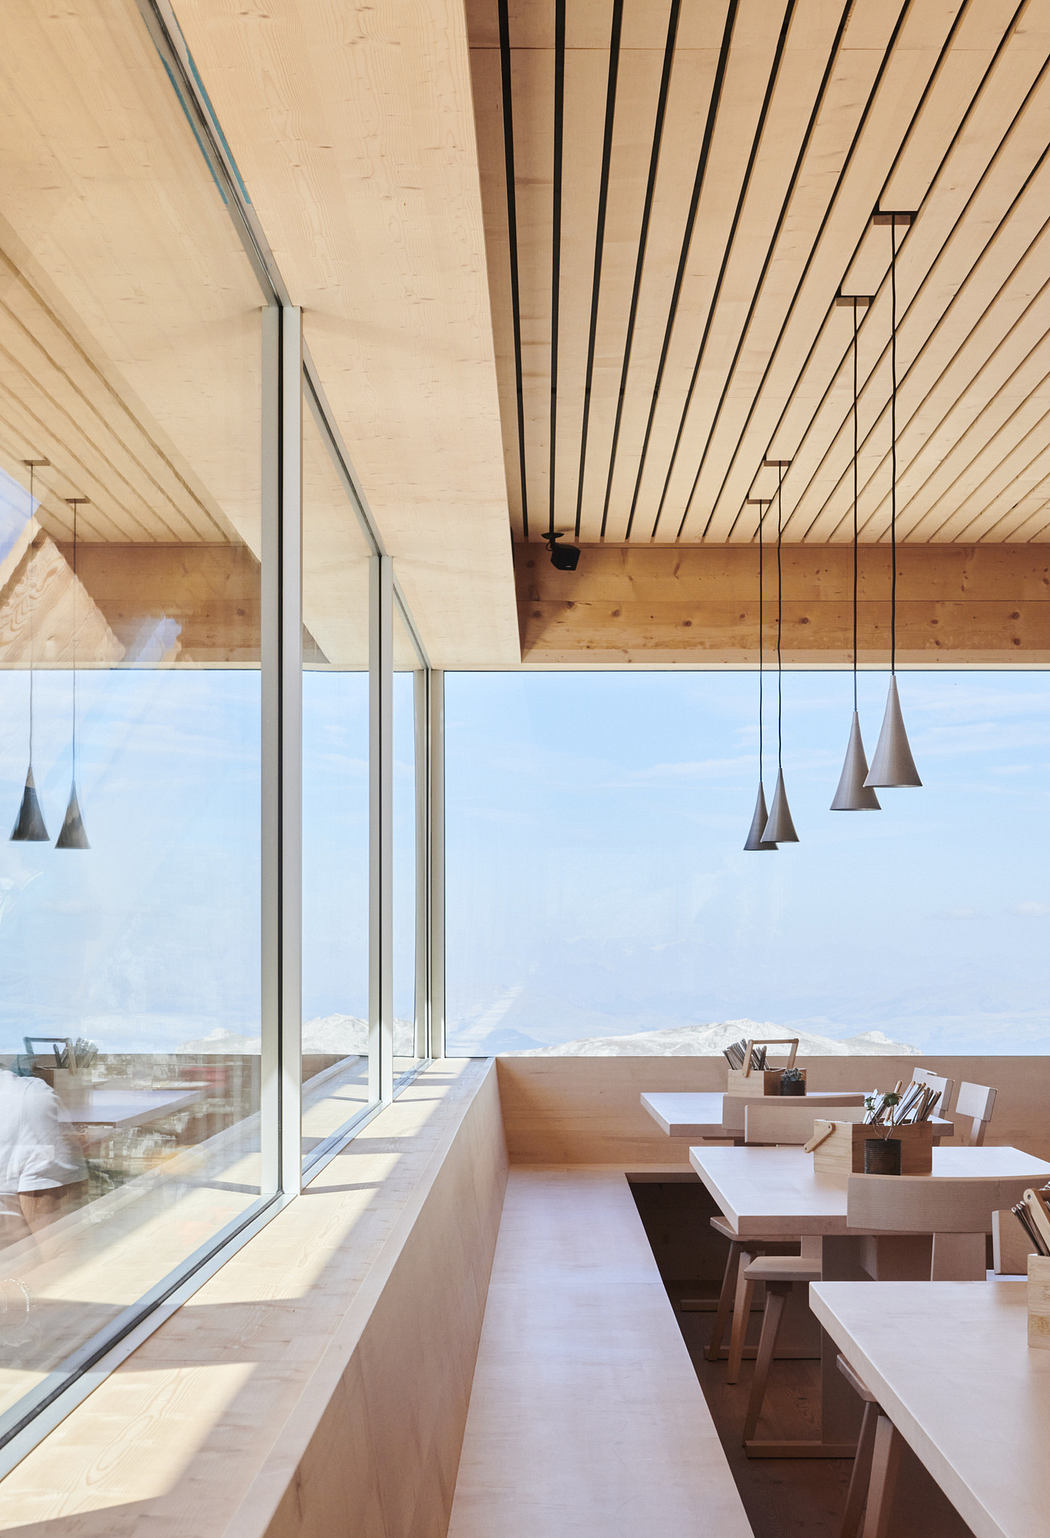 Bright, wooden interior with floor-to-ceiling windows and pendant lights.